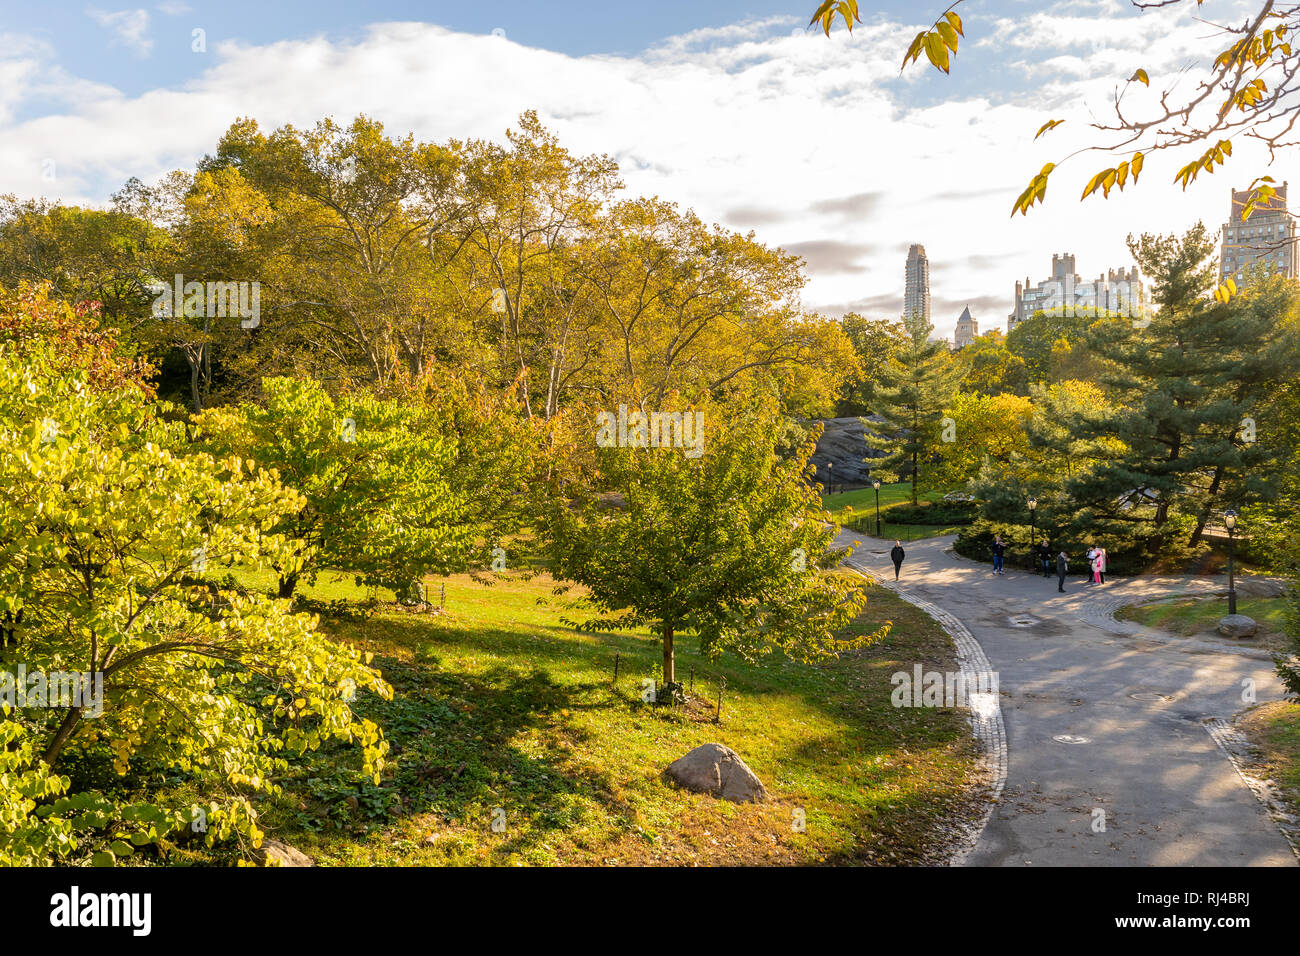 Aerial/Drone view inside Central Park New York during the colorful Autumn/Fall season Stock Photo